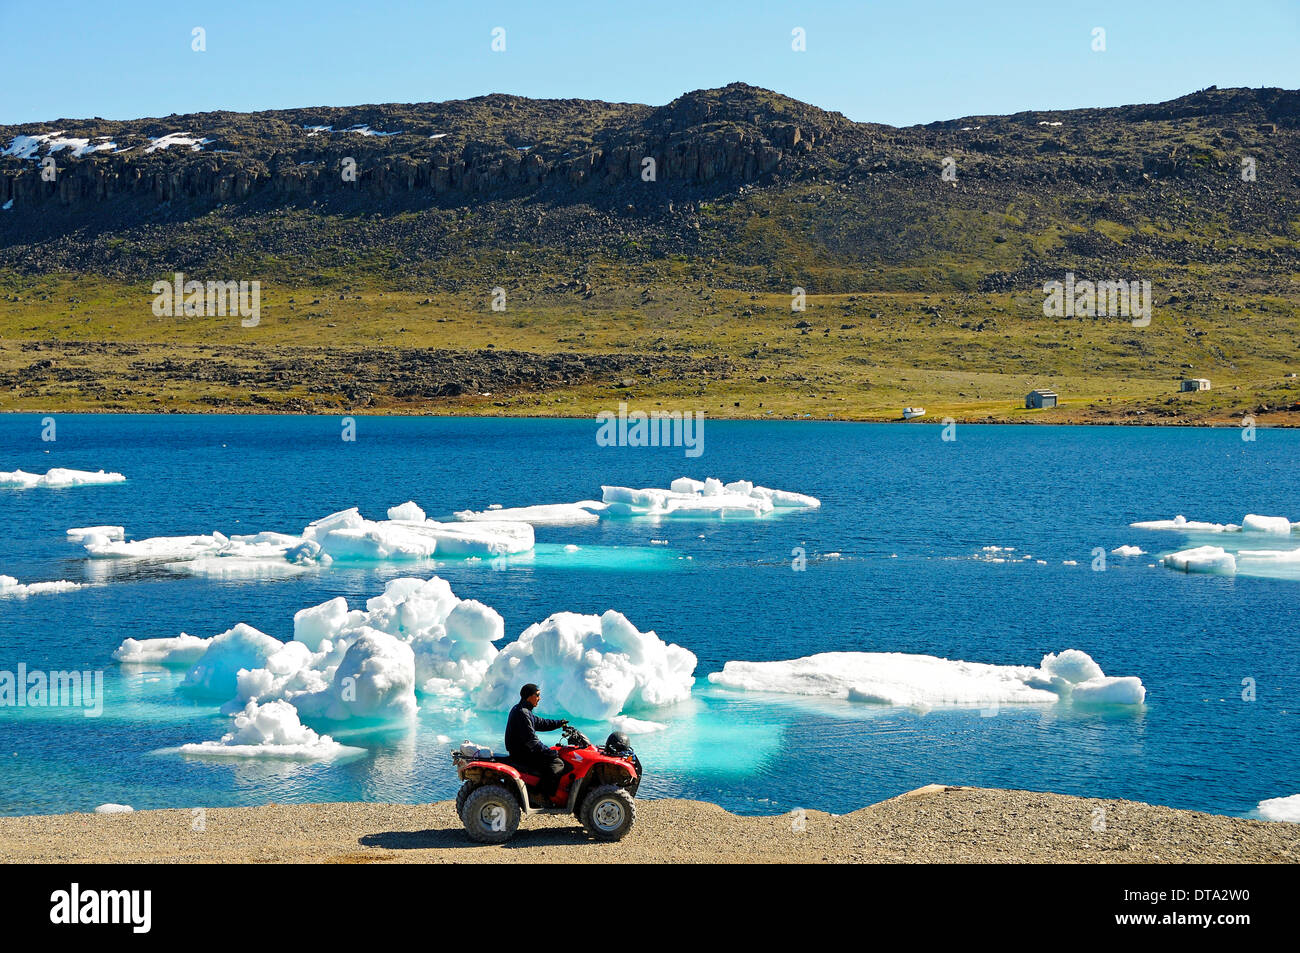 Man of the Inuit people riding a quad bike, ATM, parked on the shore of the Beaufort Sea, Arctic Ocean, Victoria Island Stock Photo